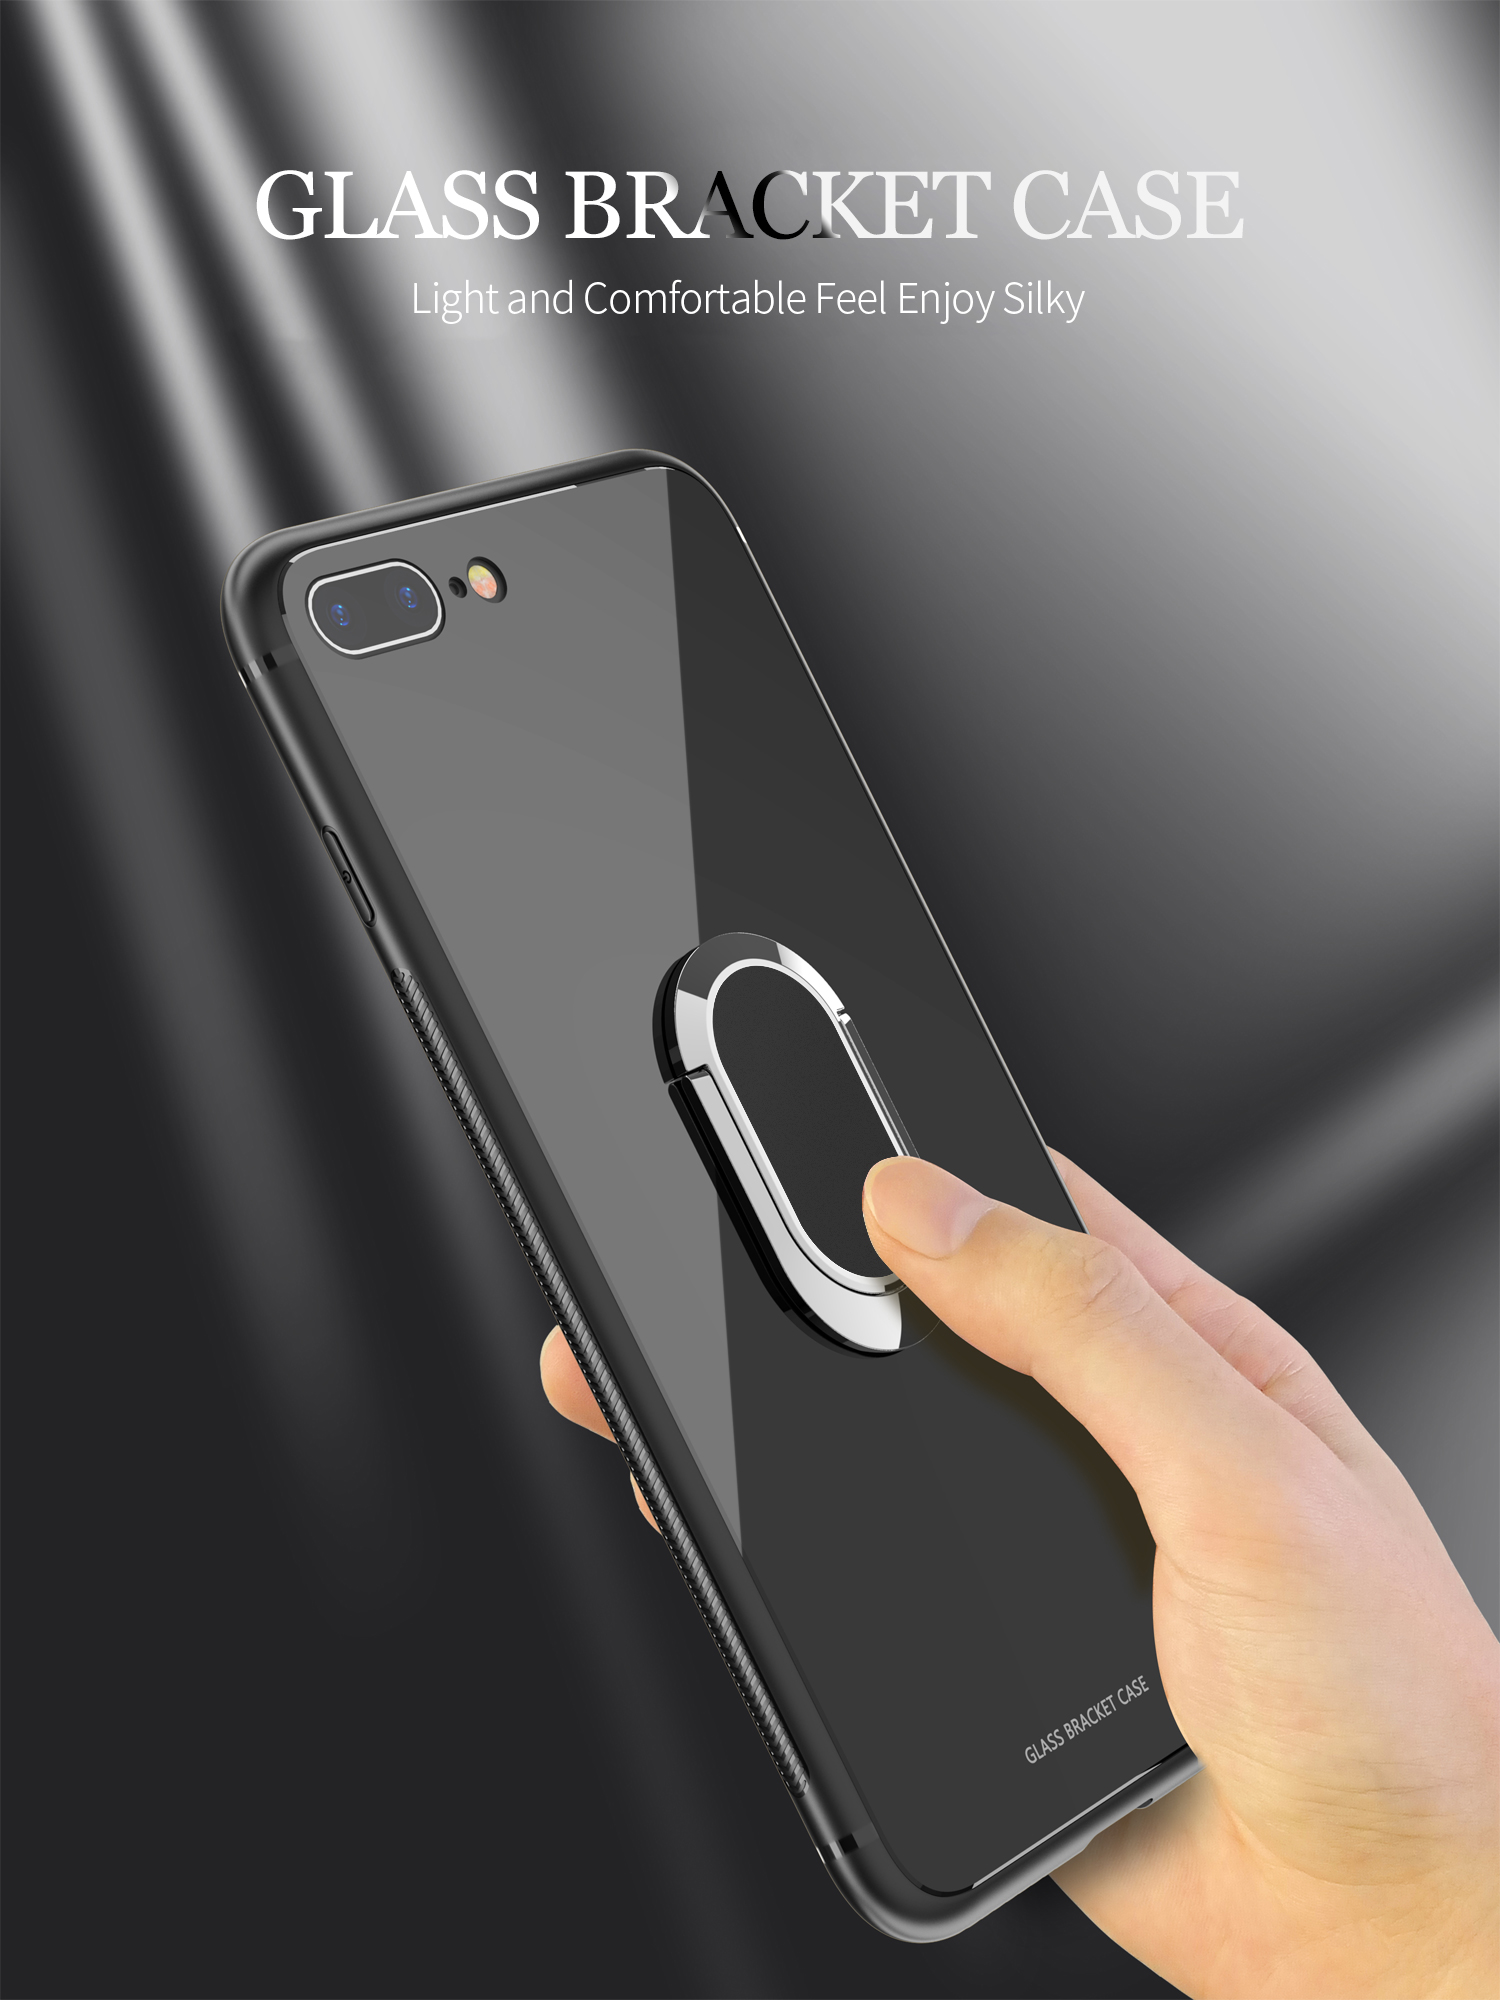 Bakeey-360deg-Rotation-Ring-Kickstand-Magnetic-Glass-Protective-Case-for-iPhone-77-Plus88-Plus-1320629-9